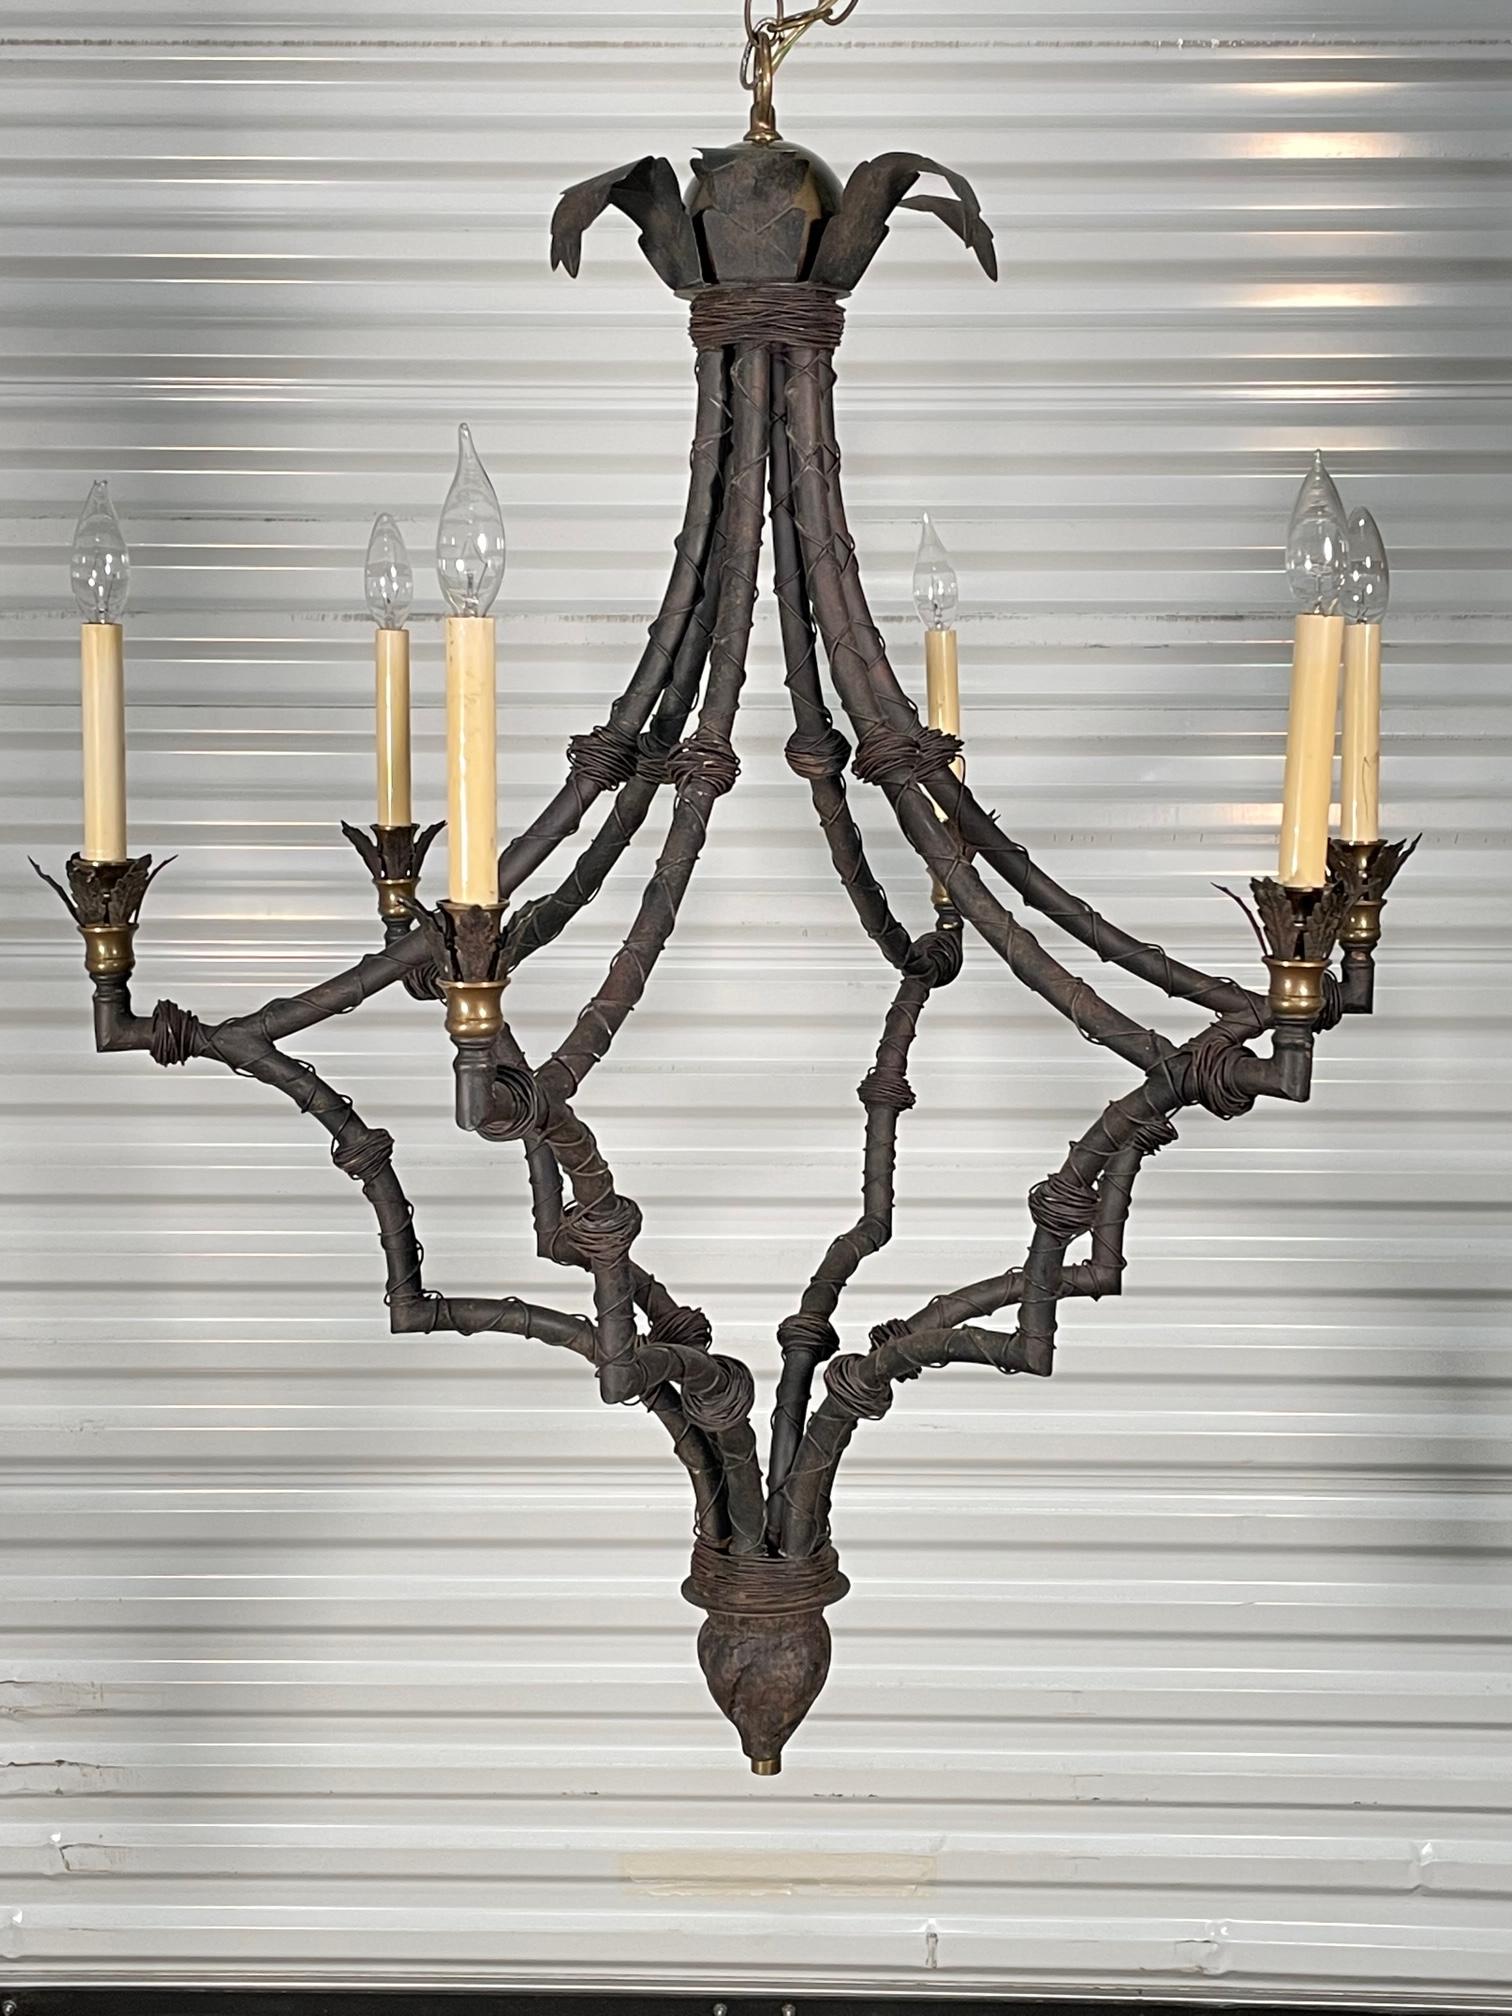 Large 6-light iron chandelier features palm frond details along with a wire wrapped frame in a modern faux bamboo motif. Good condition with imperfections consistent with age, see photos for condition details. 
For a shipping quote to your exact zip